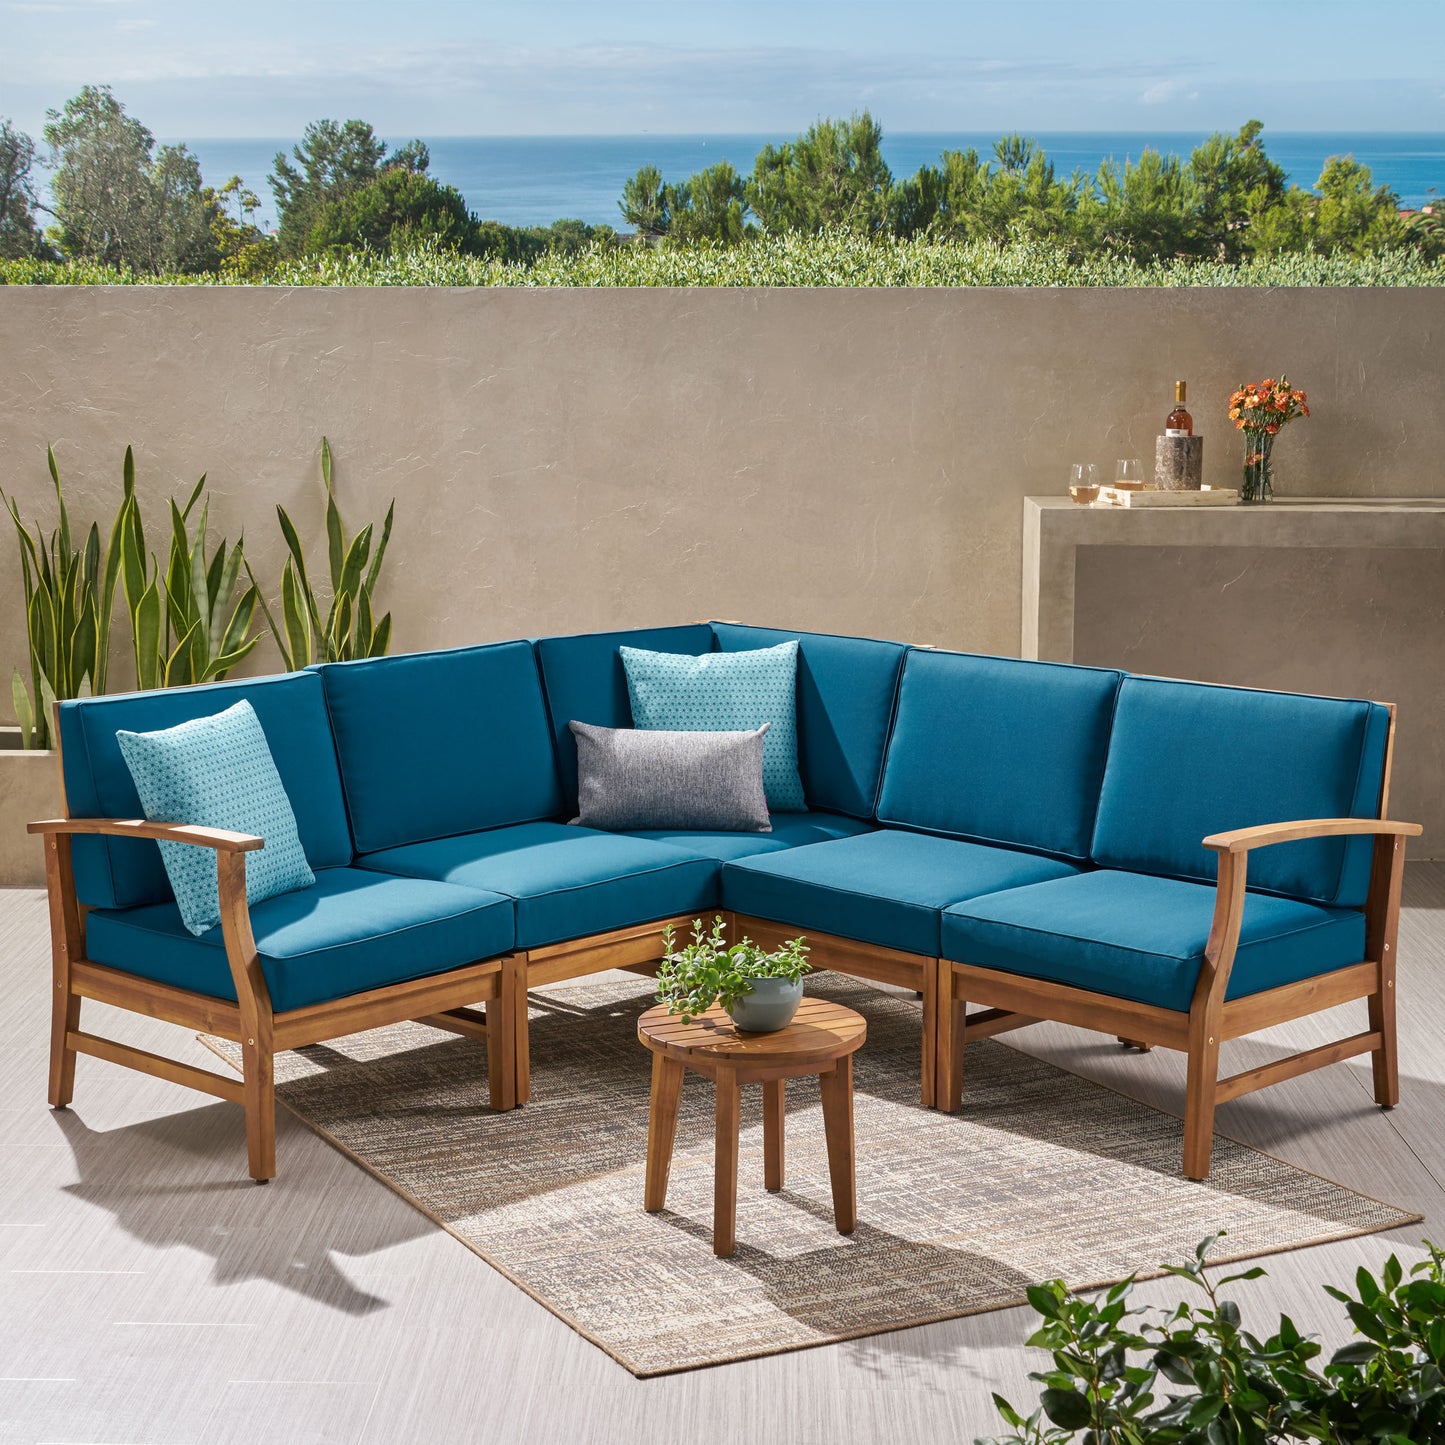 Capri Outdoor 5 Piece Chat Set with Water Resistant Cushions